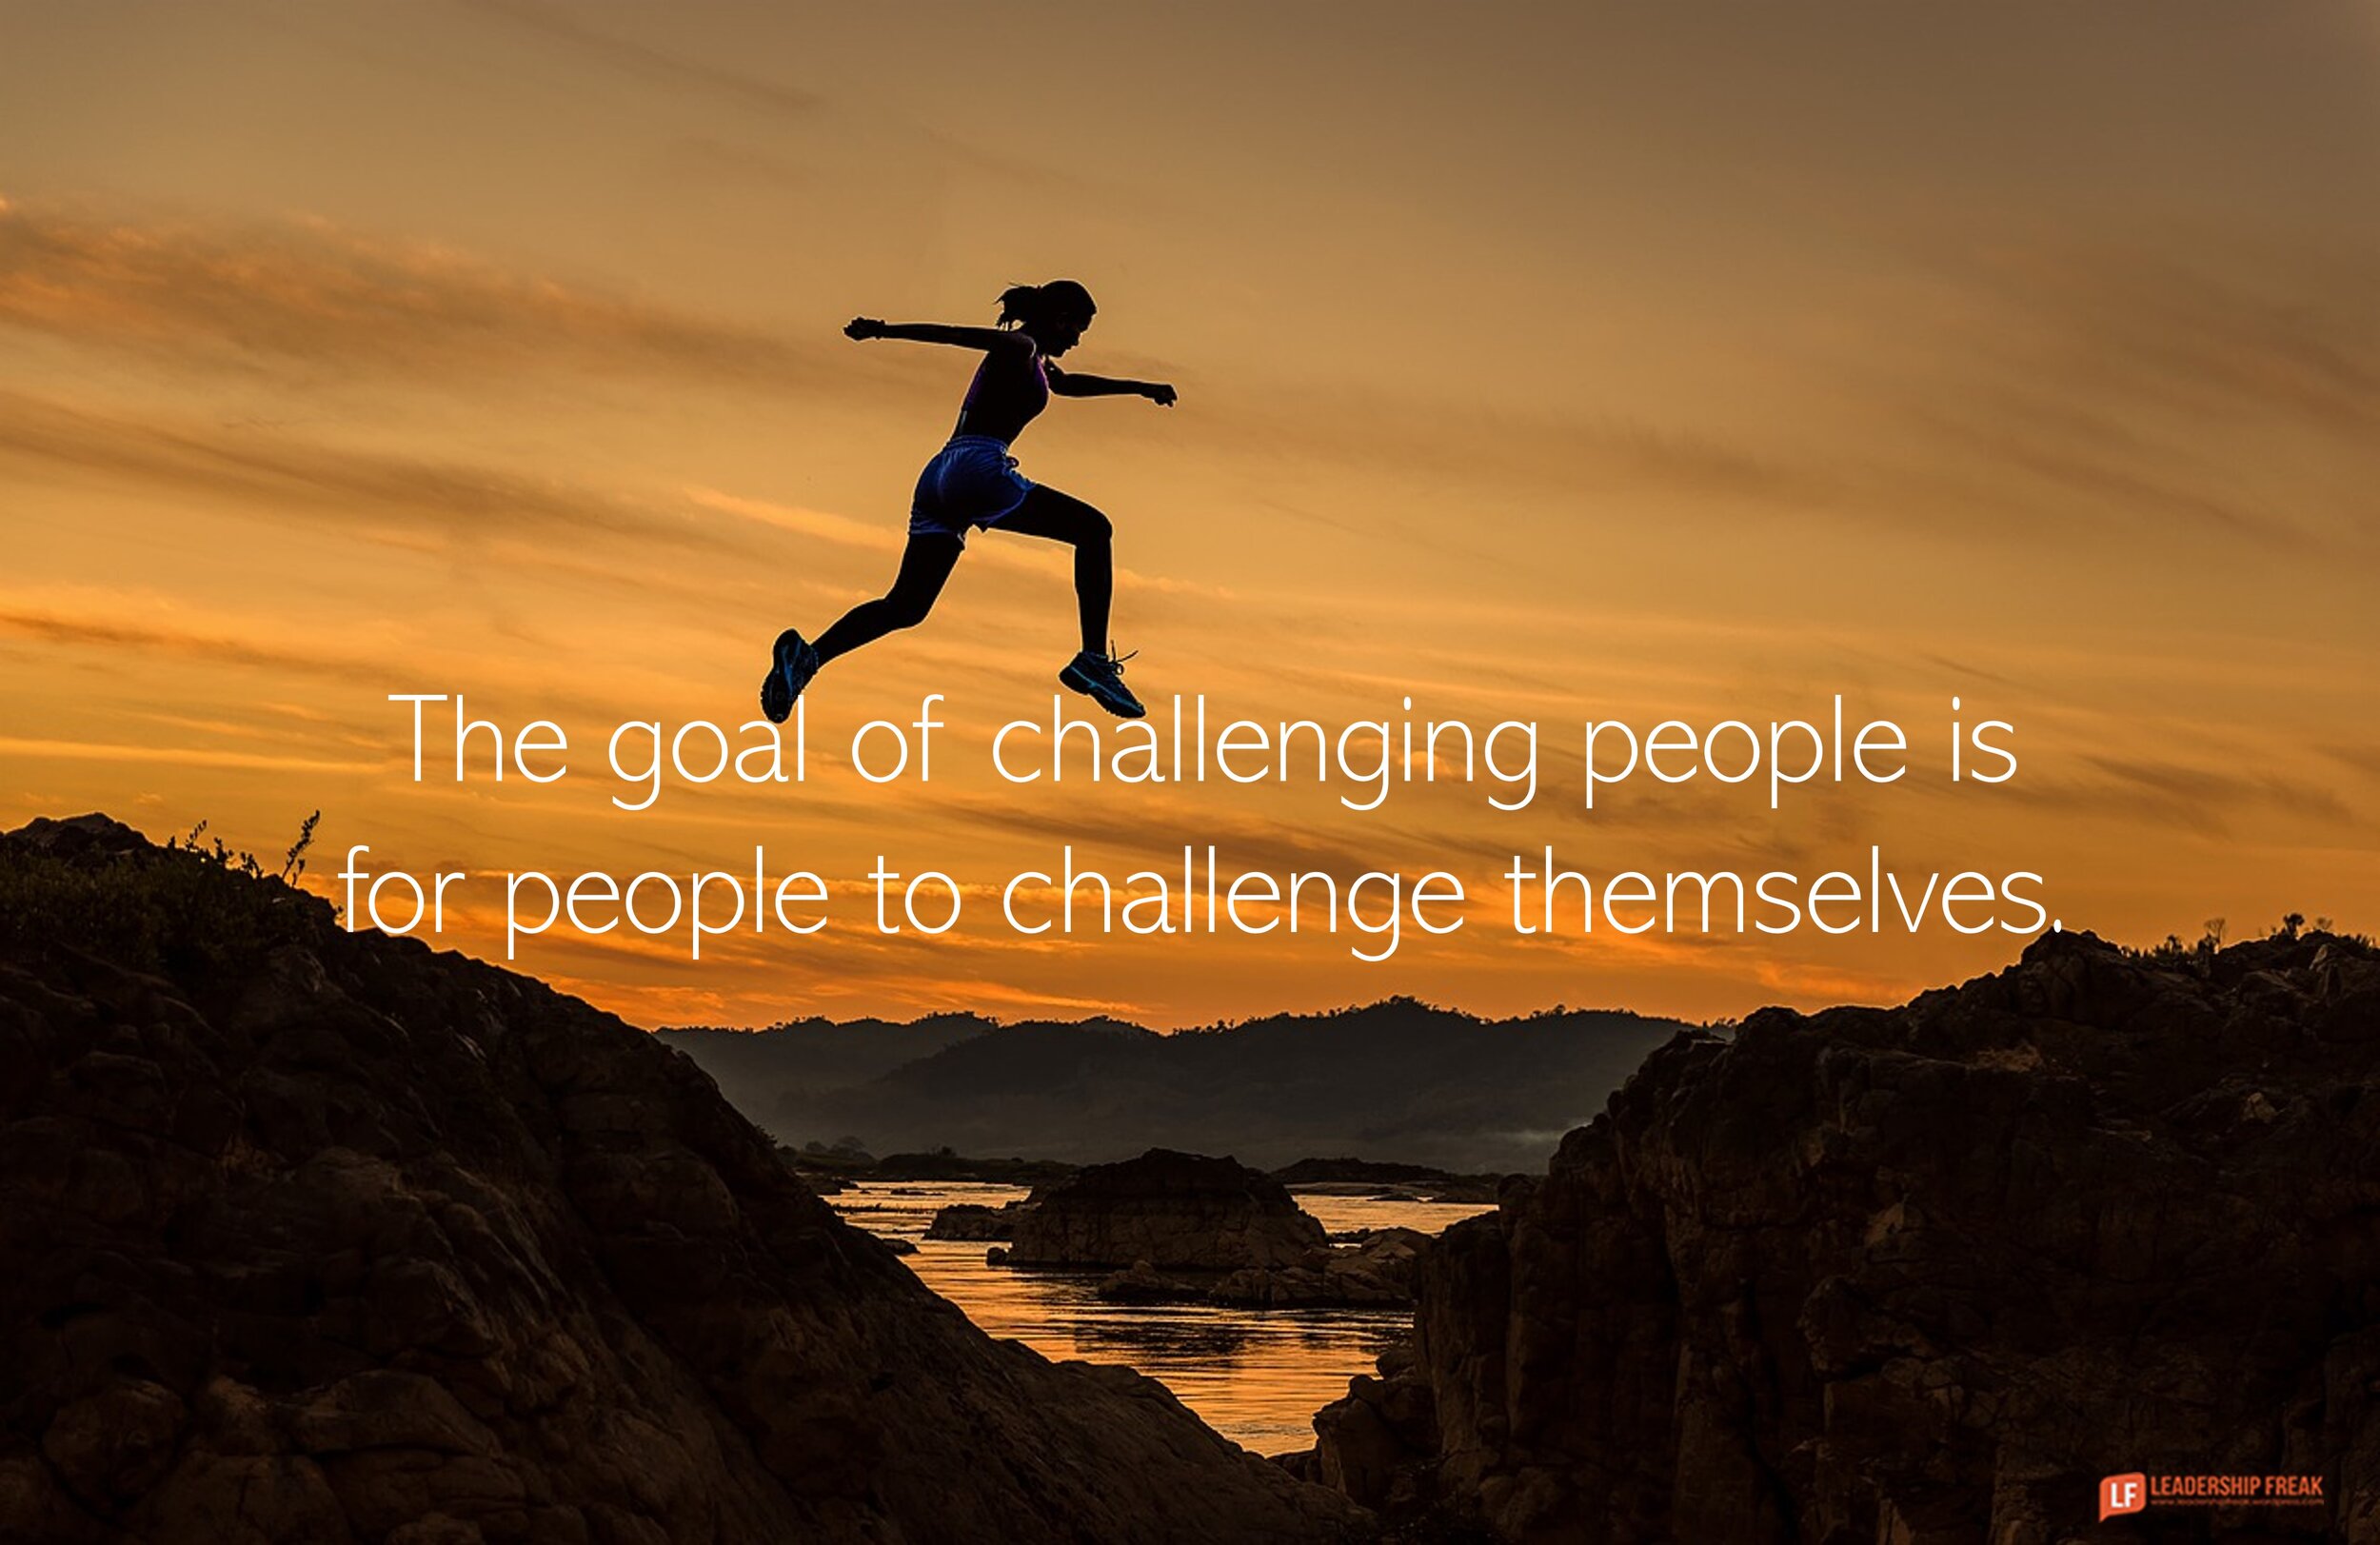 The goal of challenging people is for people to challenge themselves.